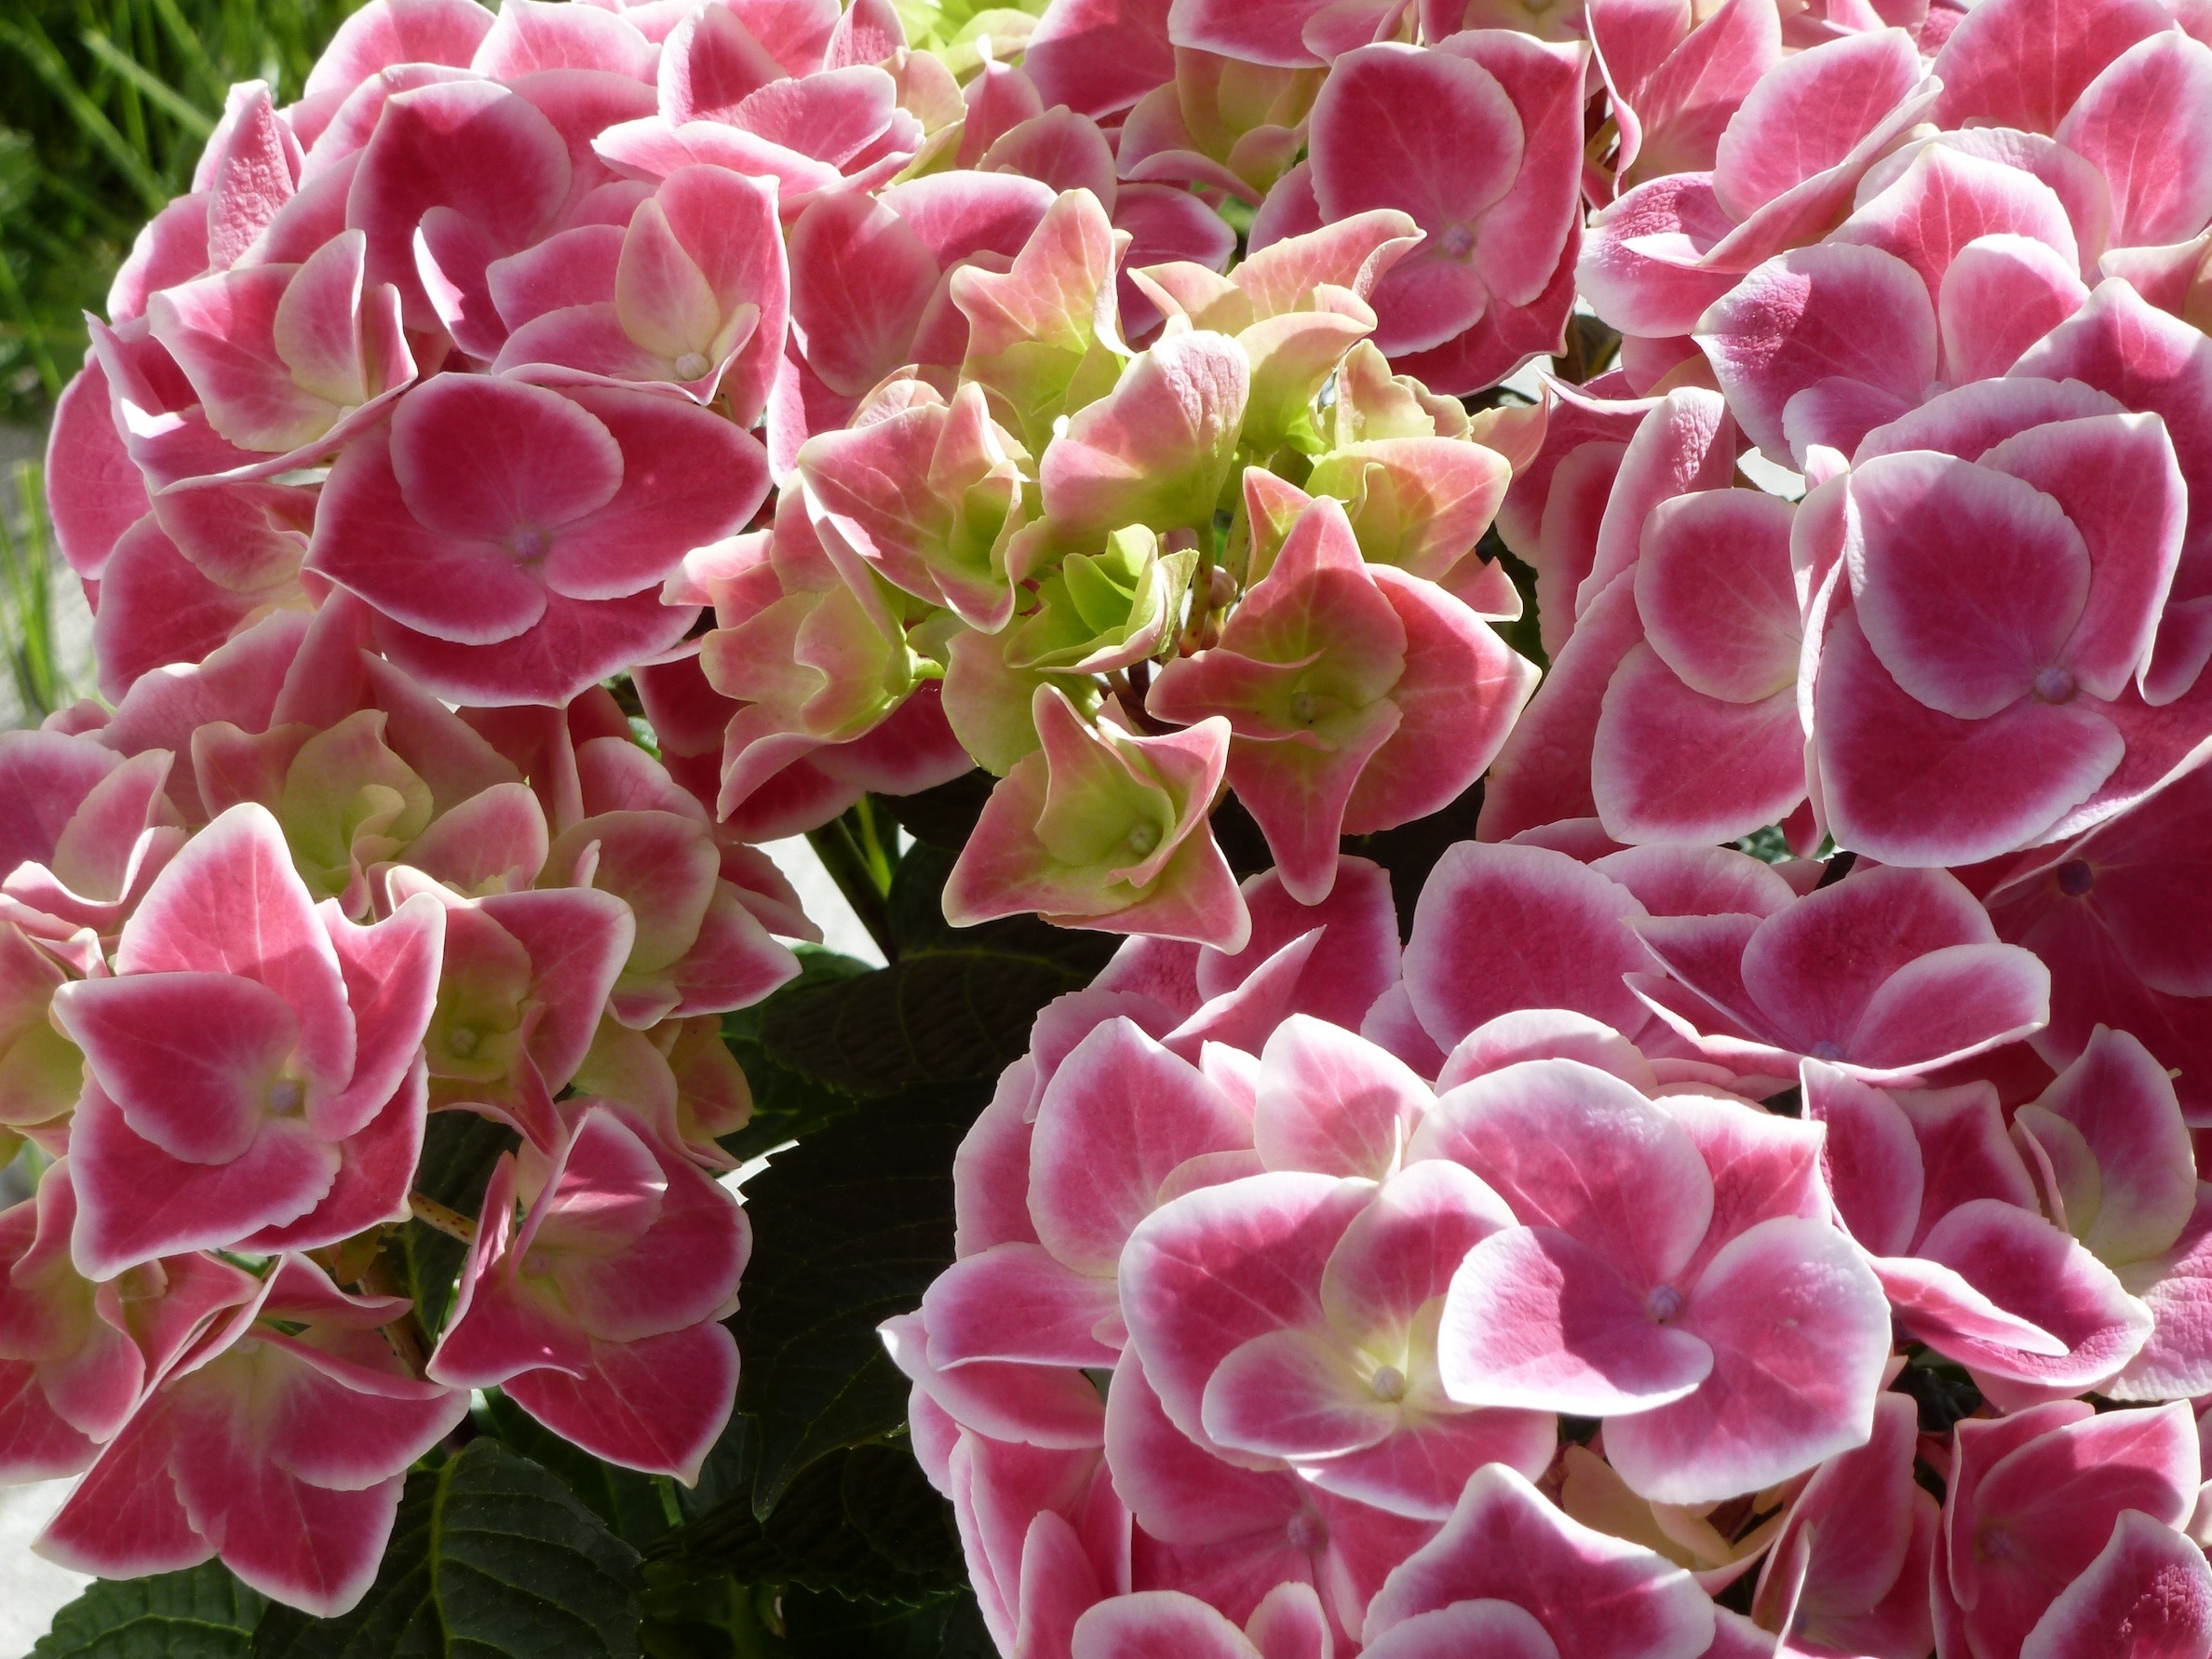 bunch of pink and white petaled flowers